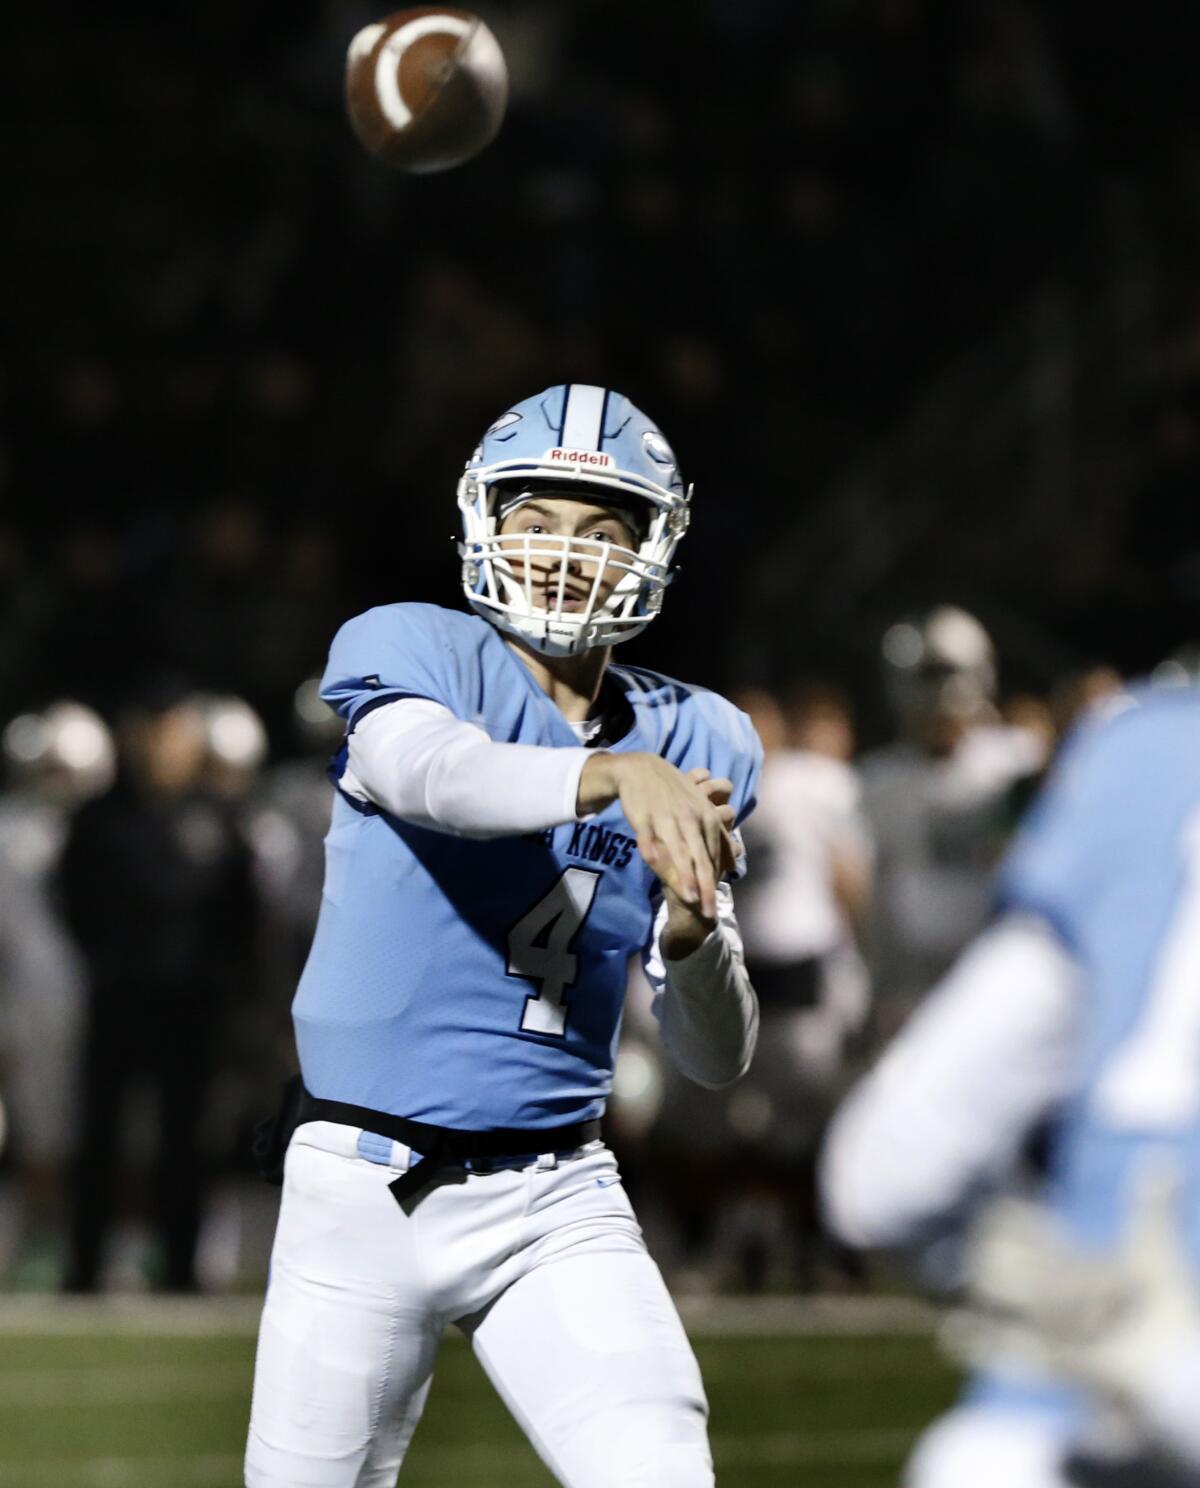 Corona del Mar quarterback Ethan Garbers throws a pass against Oceanside in the CIF State Southern California Regional Division 1-A Bowl Game on Saturday at Newport Harbor High.